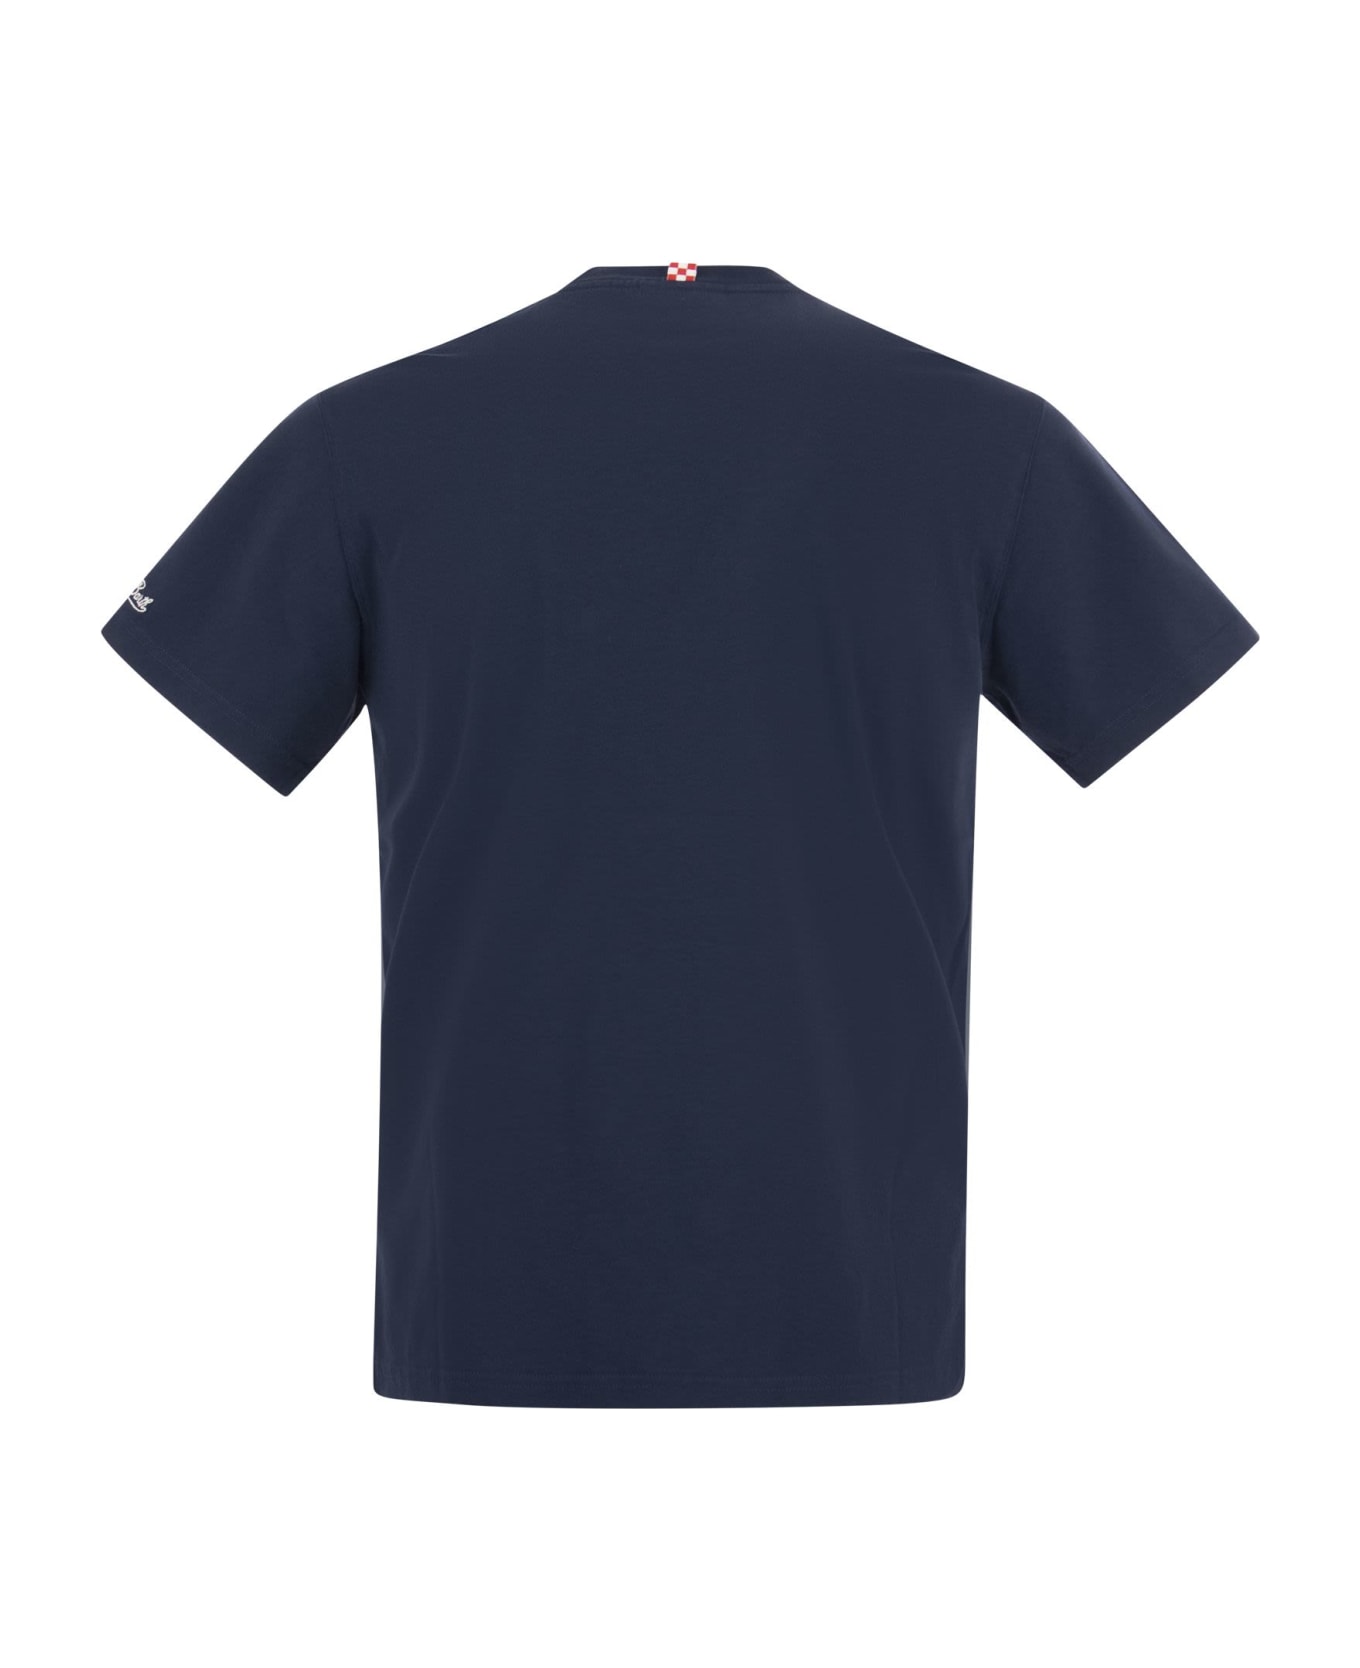 MC2 Saint Barth Cigarette T-shirt With Embroidery On Pocket - Blue